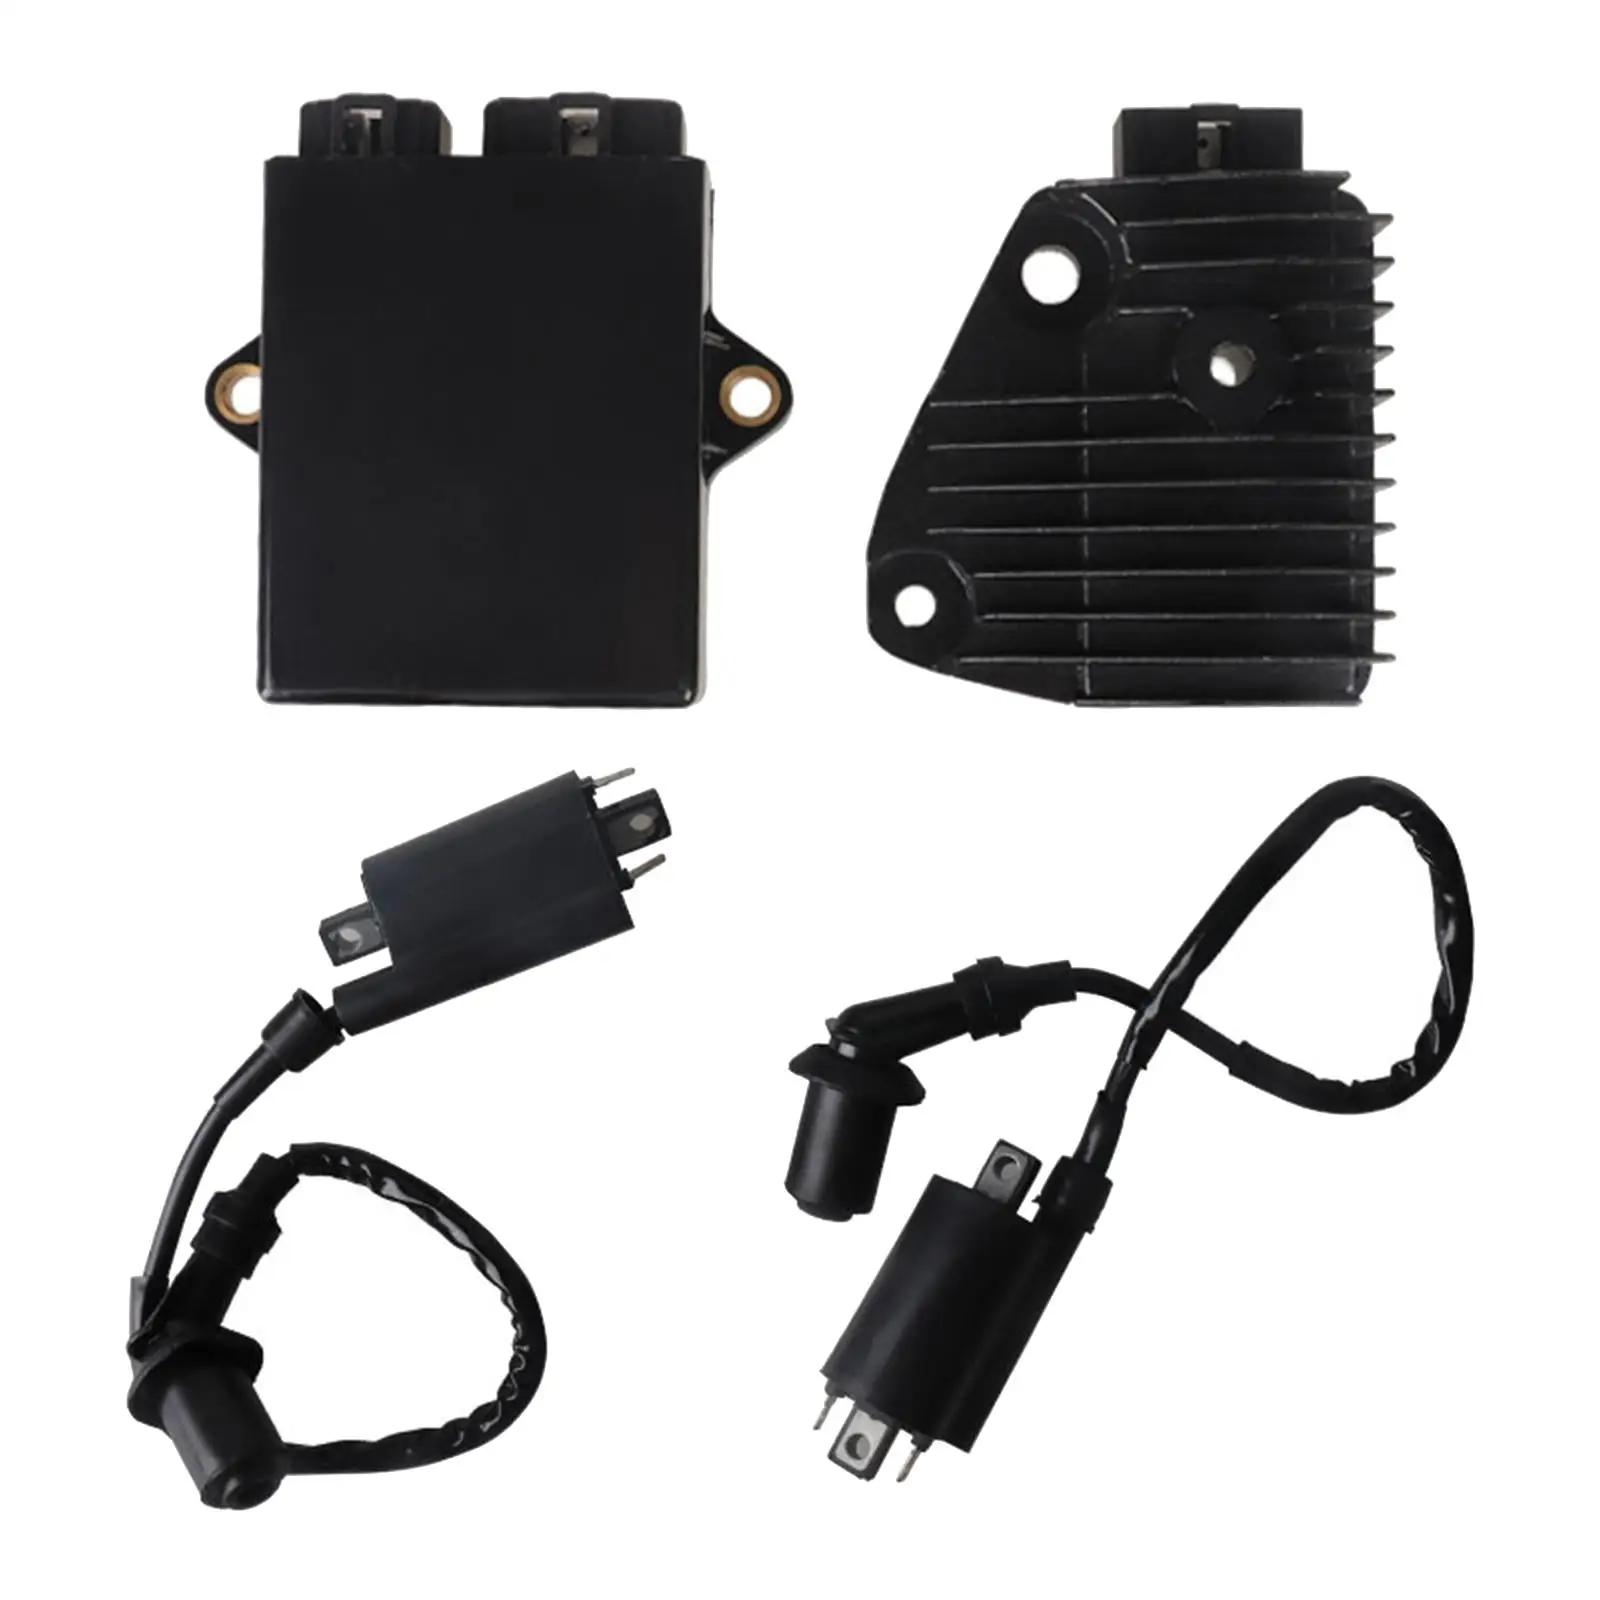 Cdi Ignition Coil Regulator Durable Replaces for Yamaha XV250 Route 66